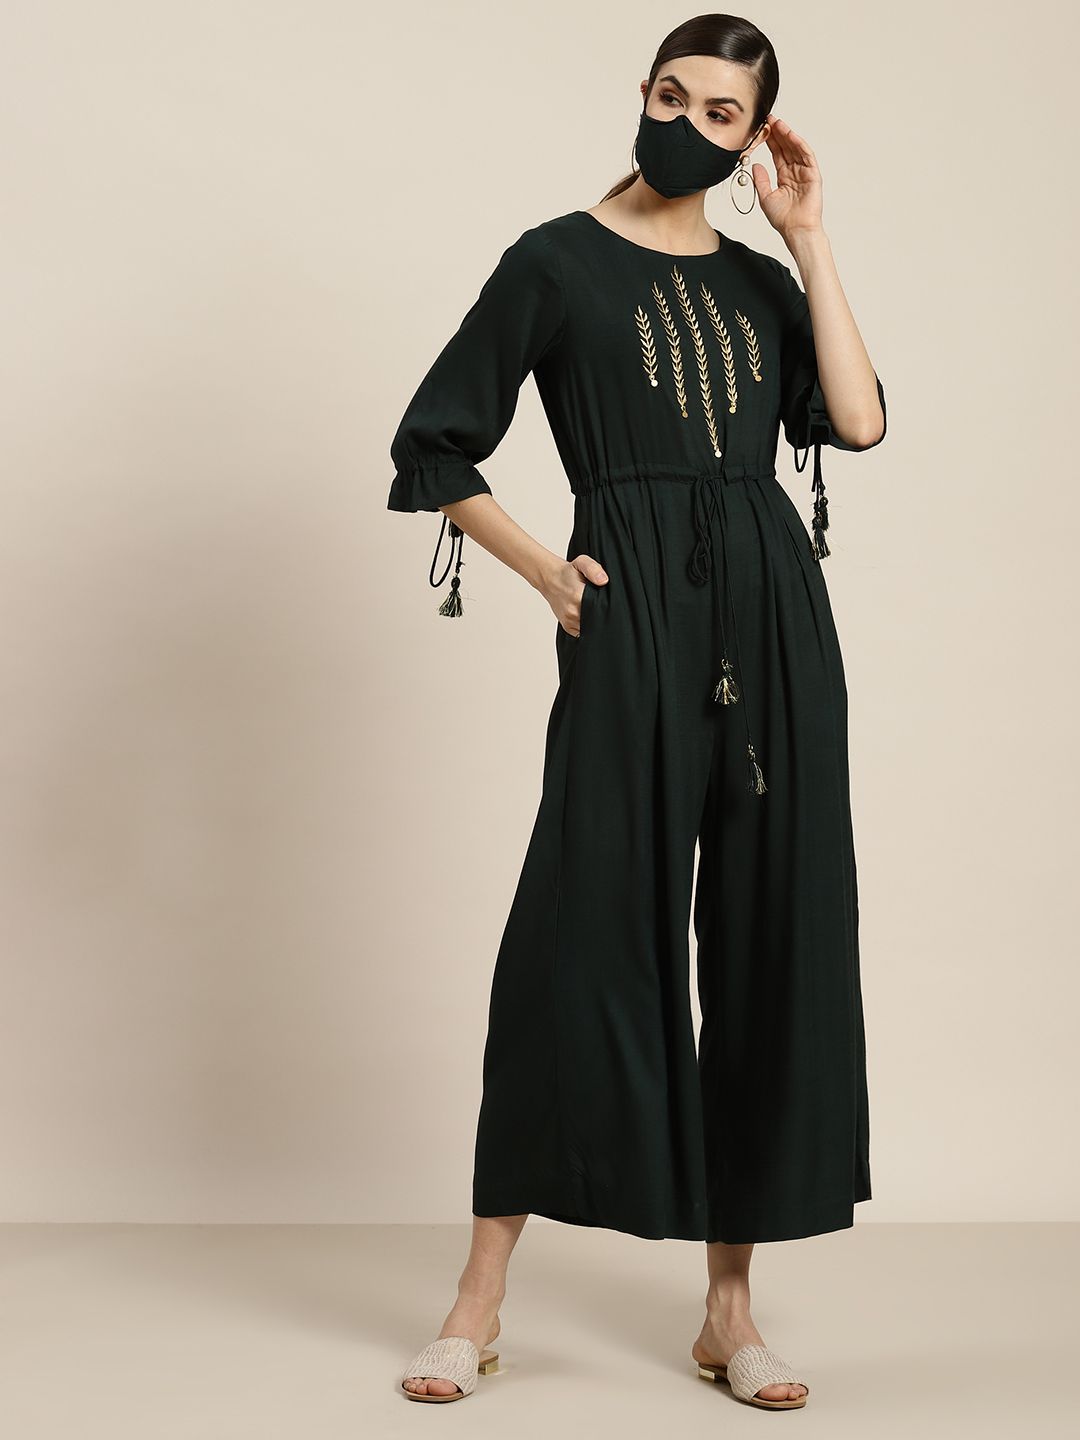 Juniper Women Green Embroidered Basic Jumpsuit with Gather detail Price in India